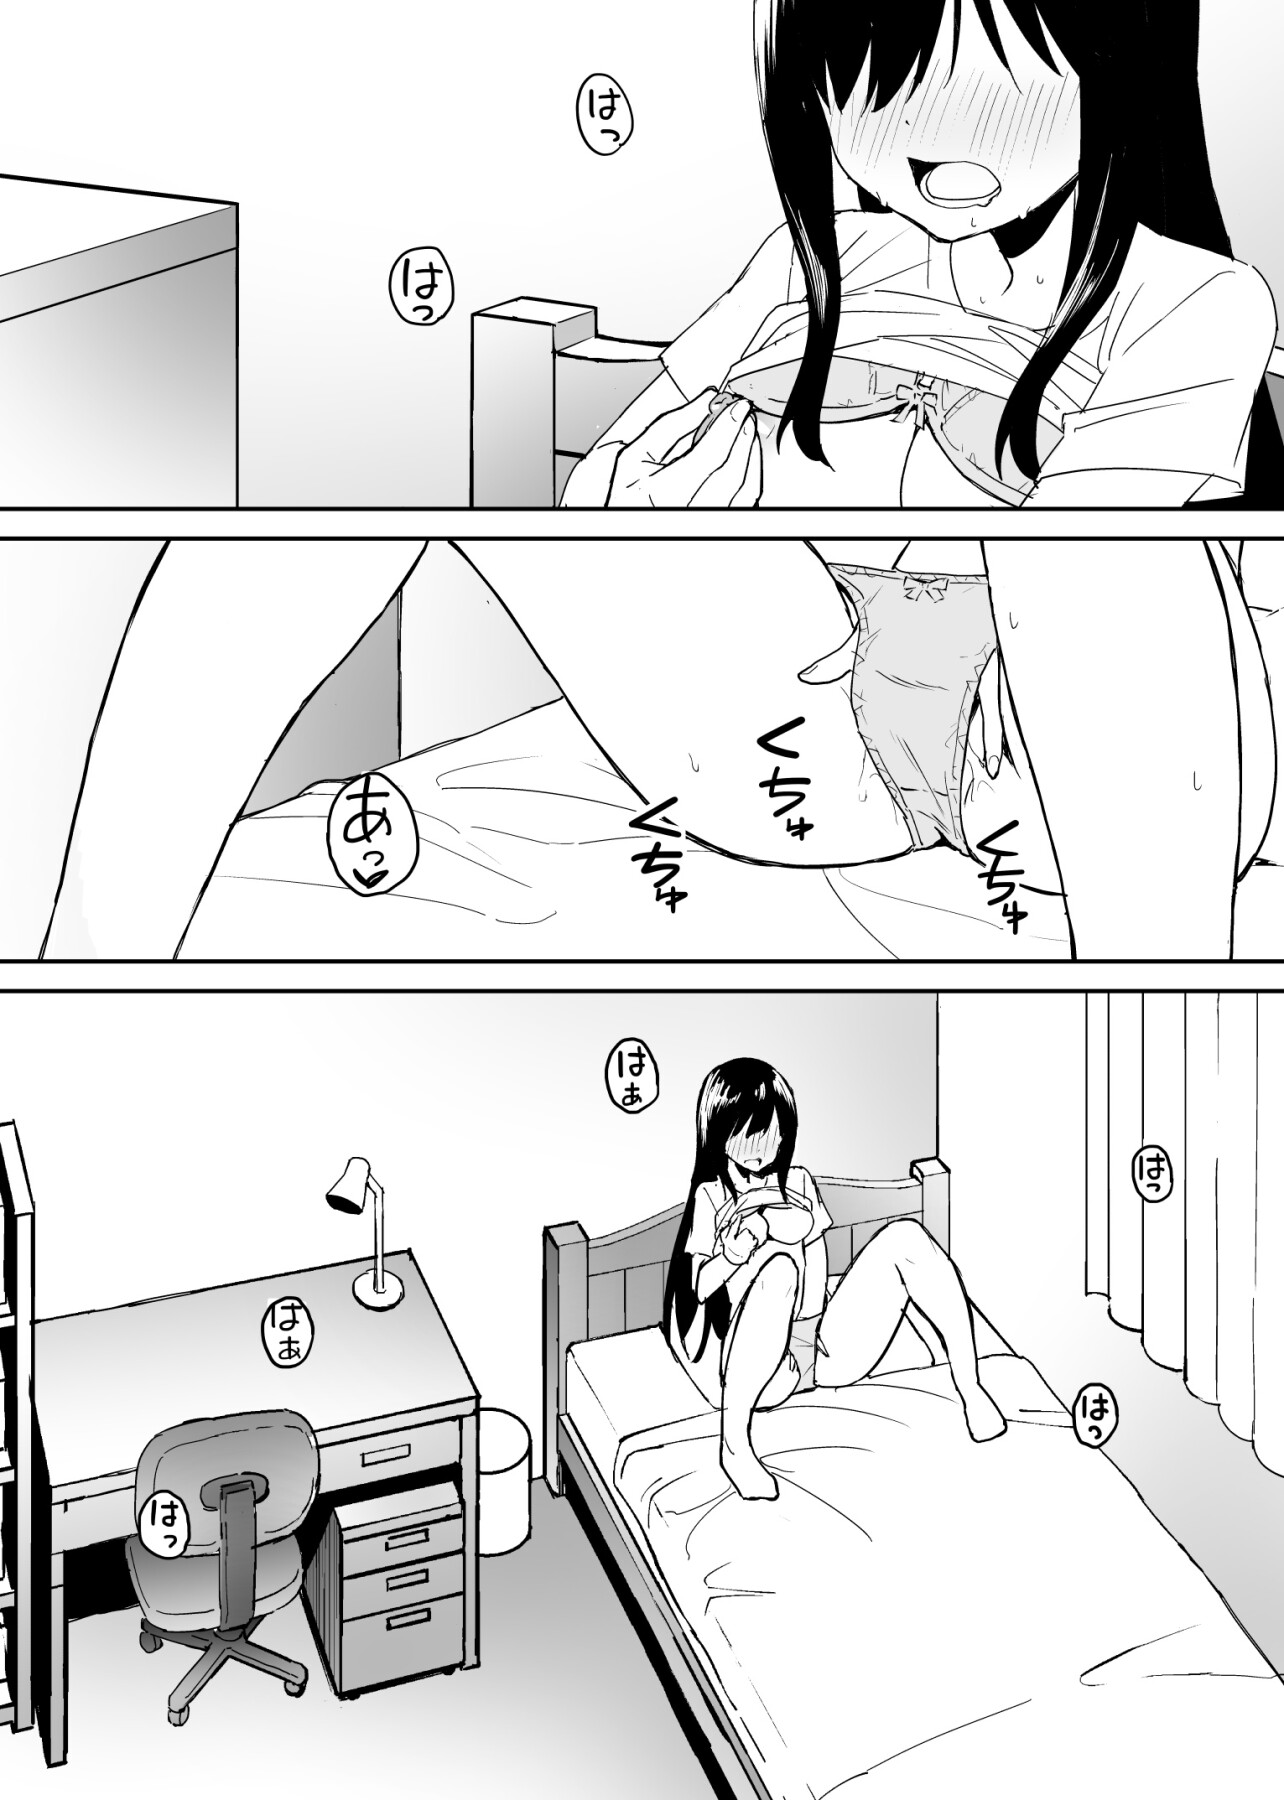 Hentai Manga Comic-A Disgusting Unemployed Old Man (Me) Was Pleased When He Irresponsibly Creampied a Beautiful JK Girl's Virgin Pussy-Read-2